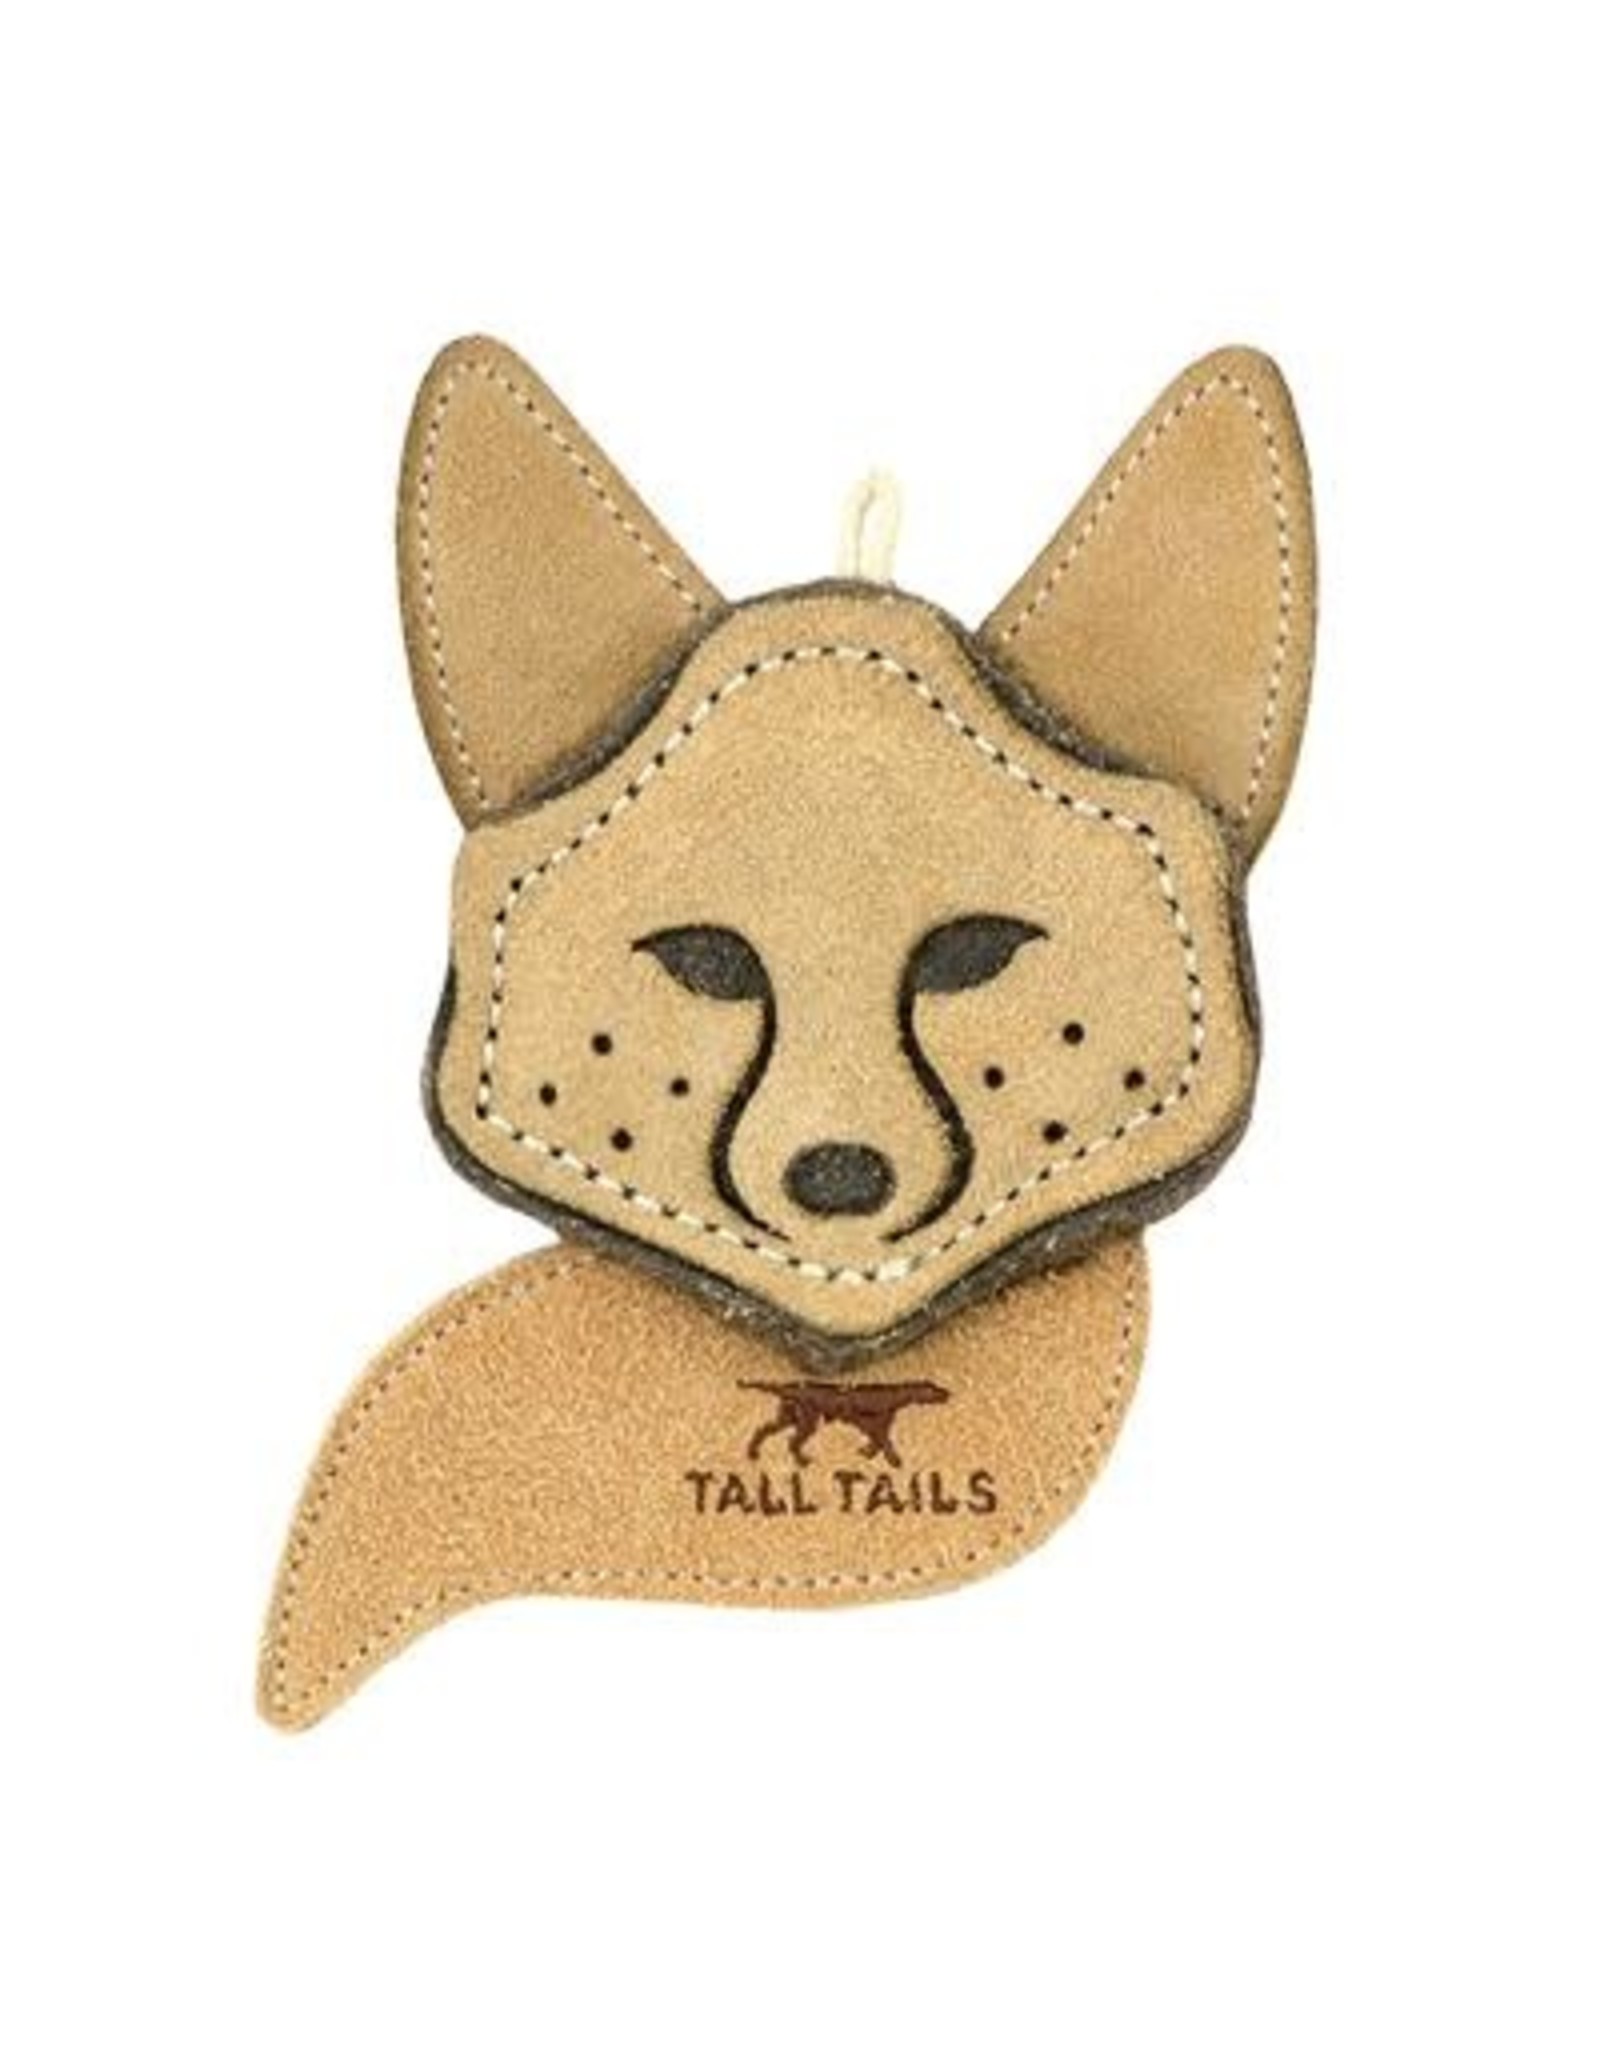 Tall Tails Tall Tails: Scrappy Critter Leather Fox, 4 inch